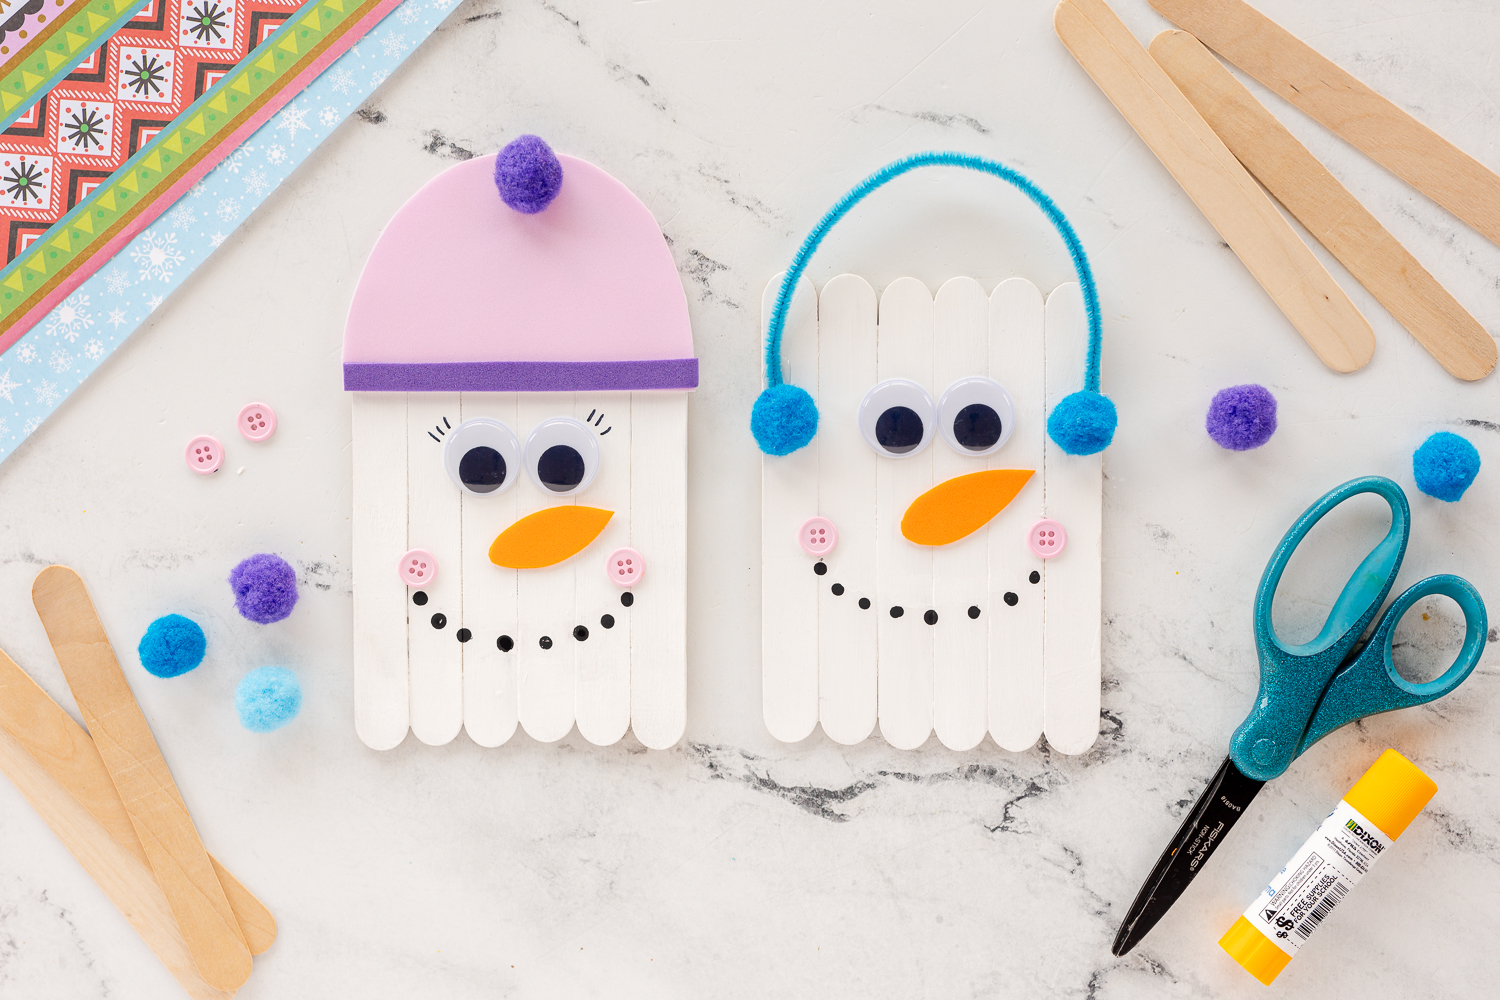 snowmen made from popsicle sticks on table with craft supplies